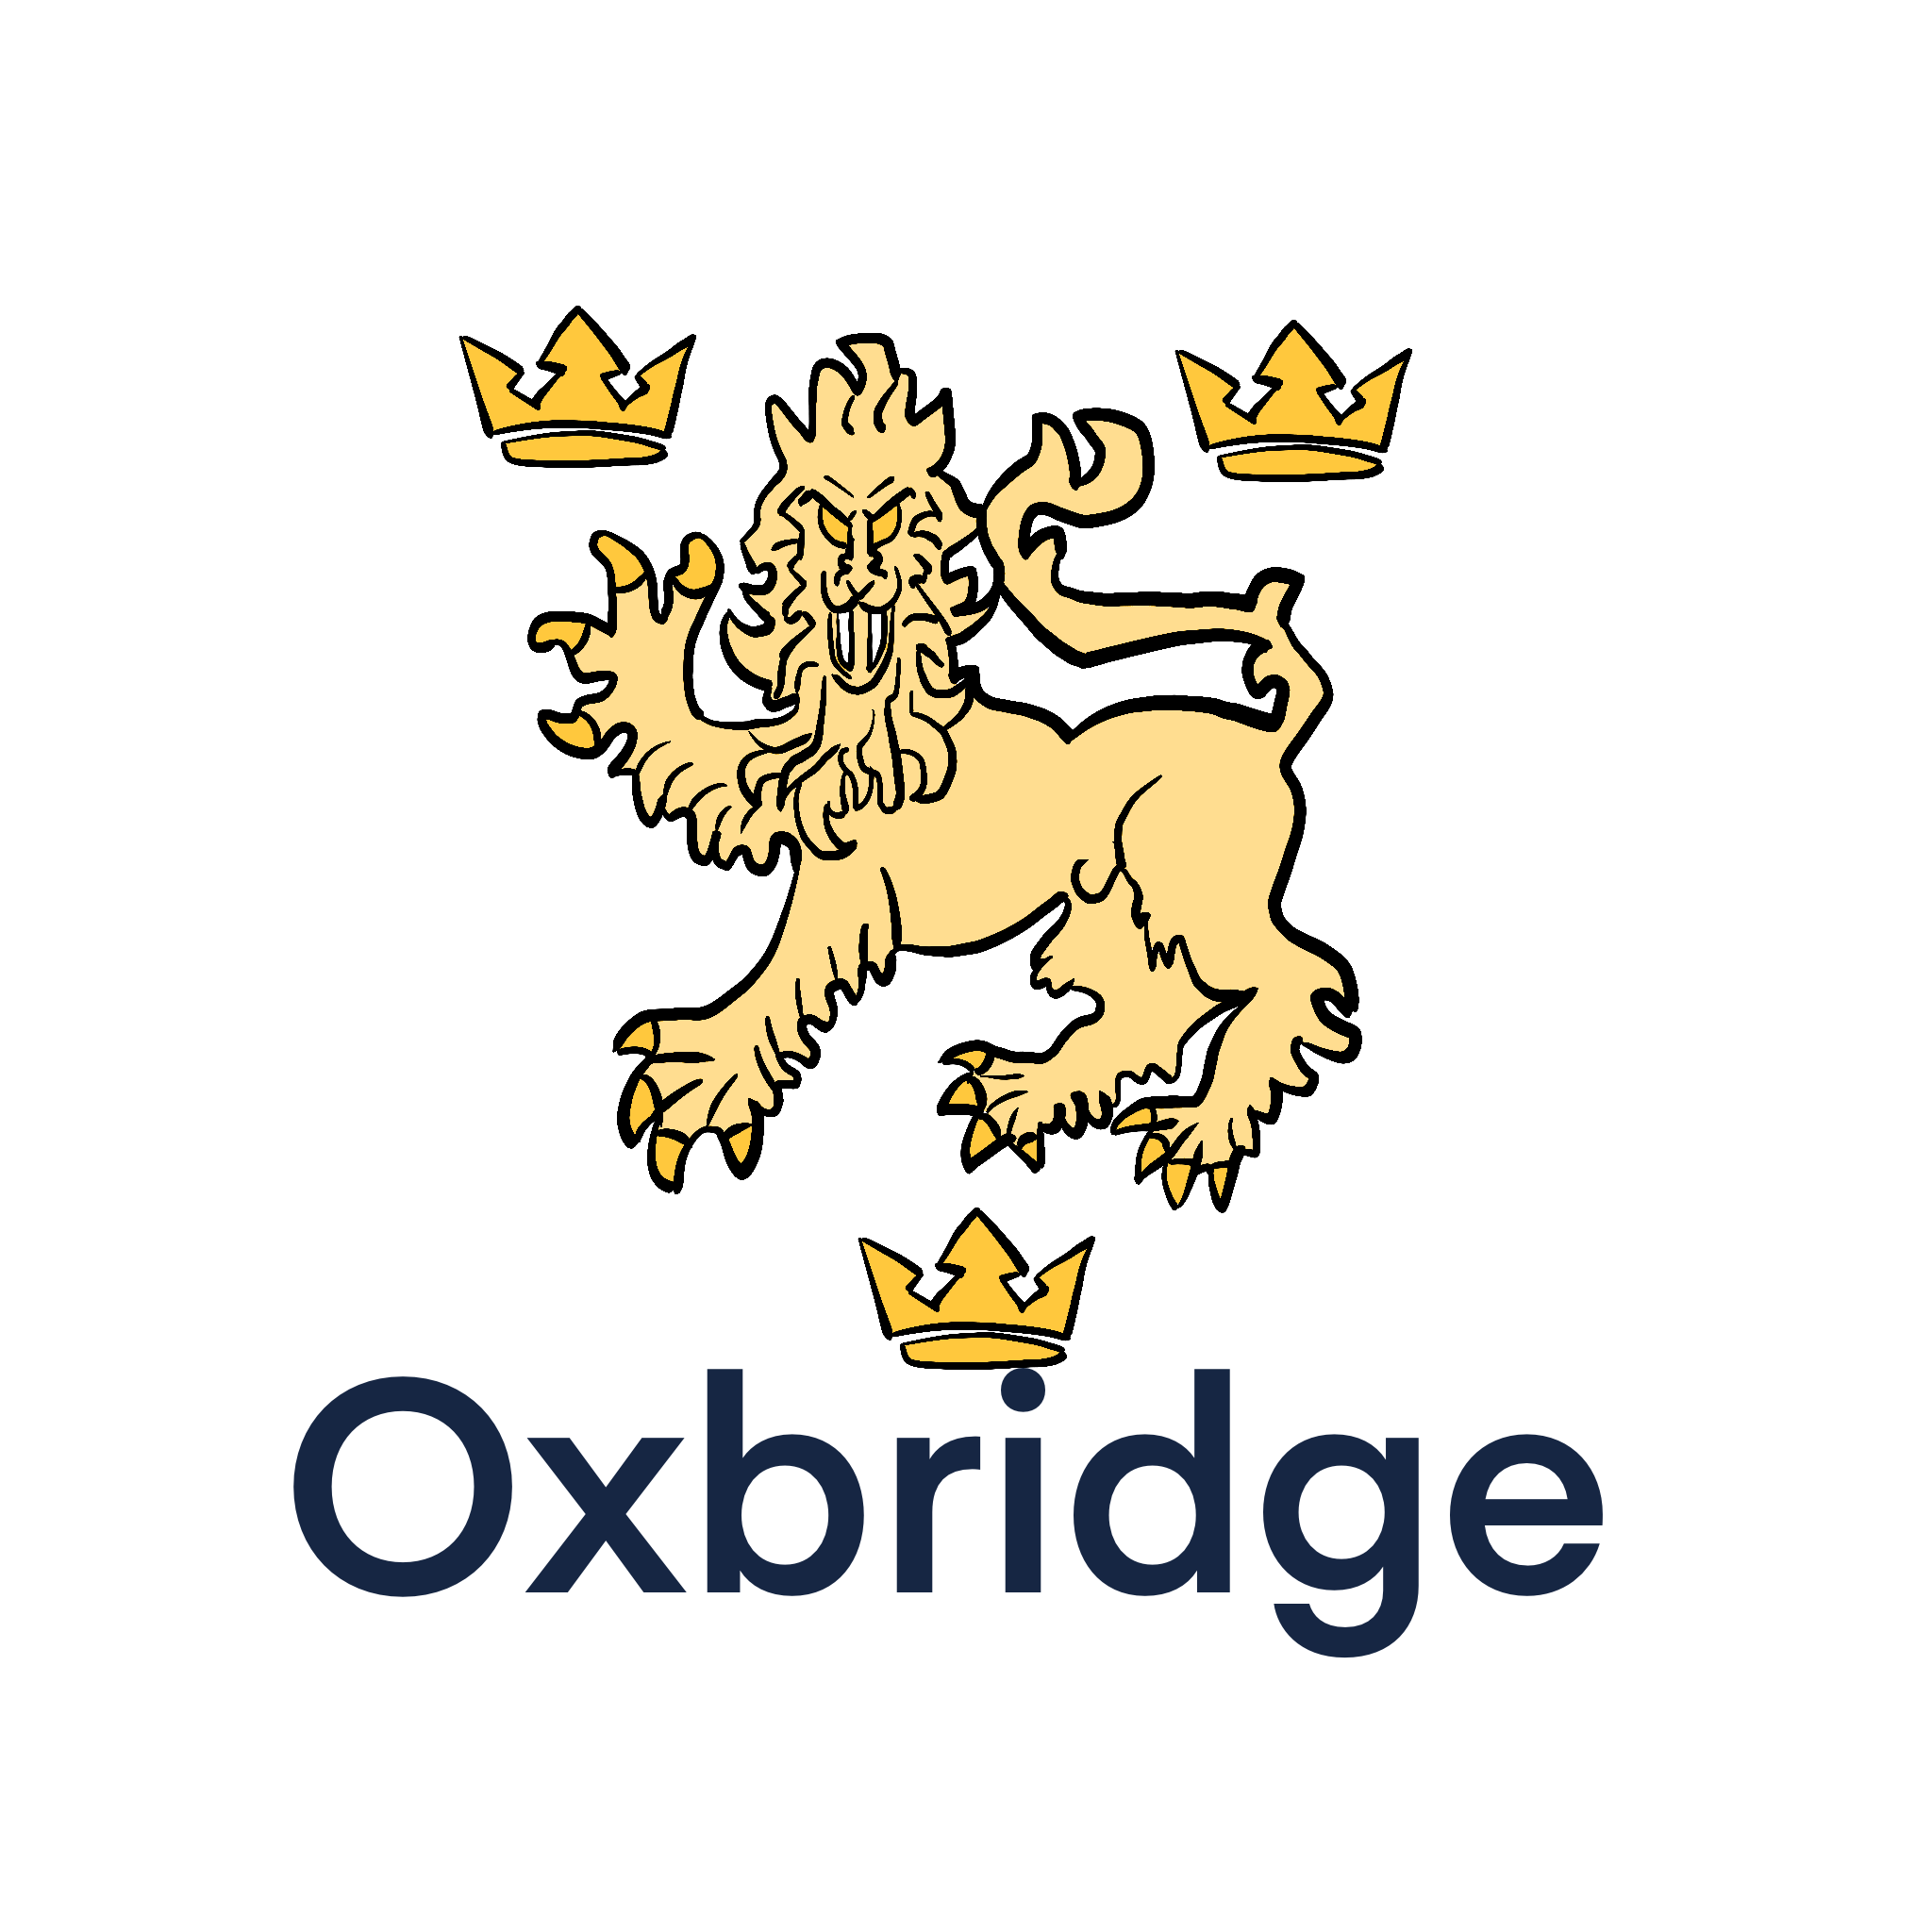 Anna holds a degree from Oxbridge